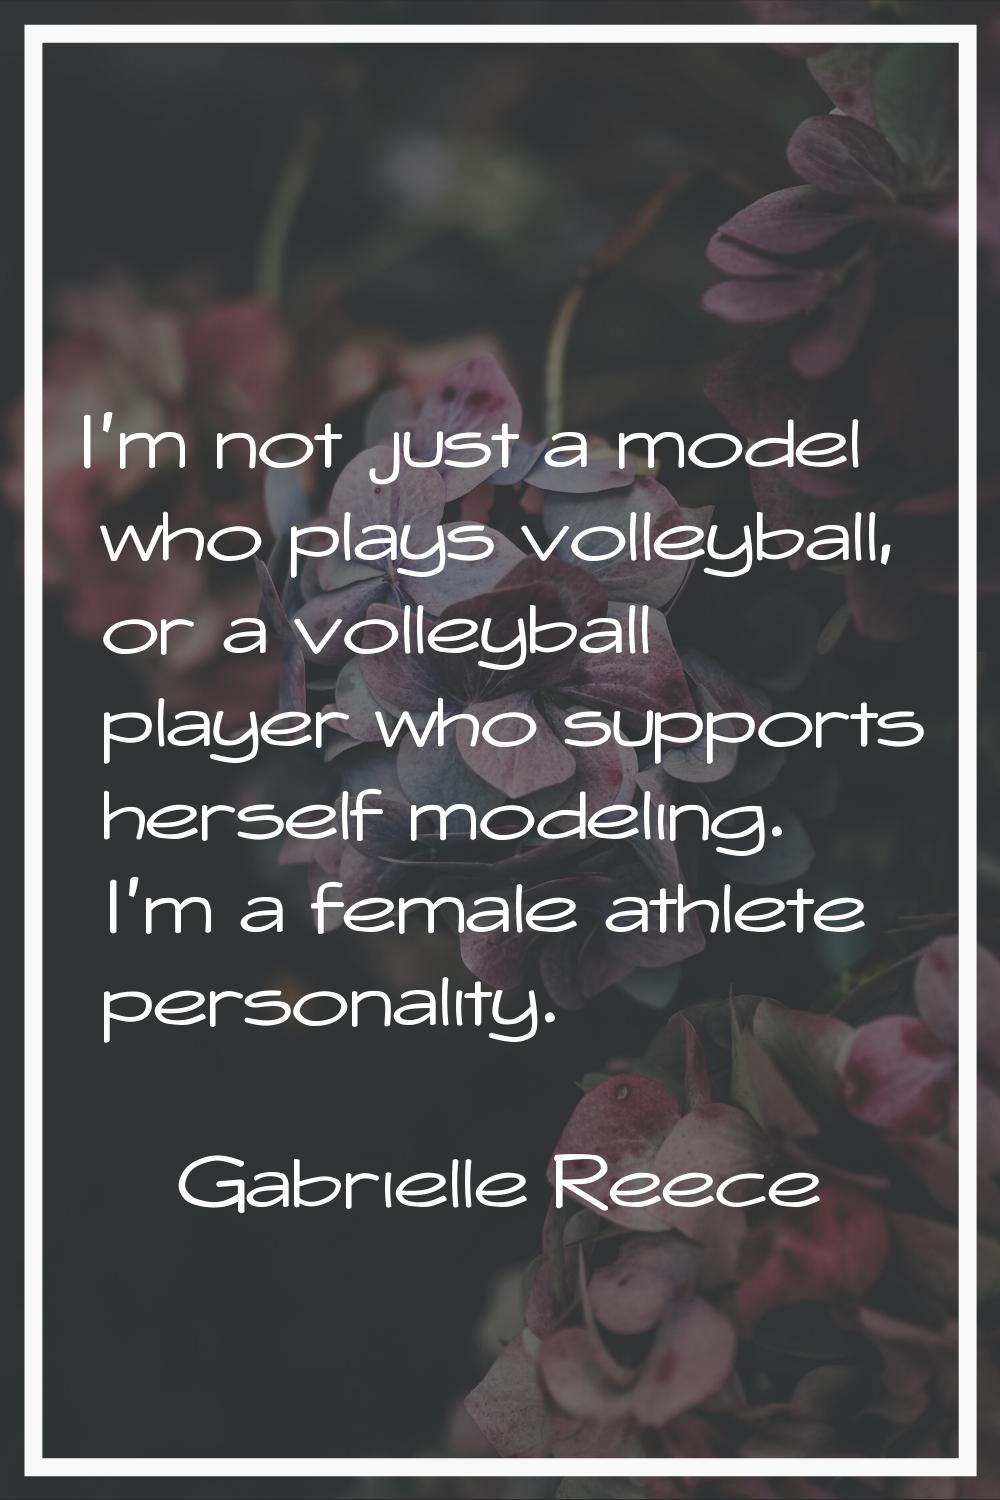 I'm not just a model who plays volleyball, or a volleyball player who supports herself modeling. I'